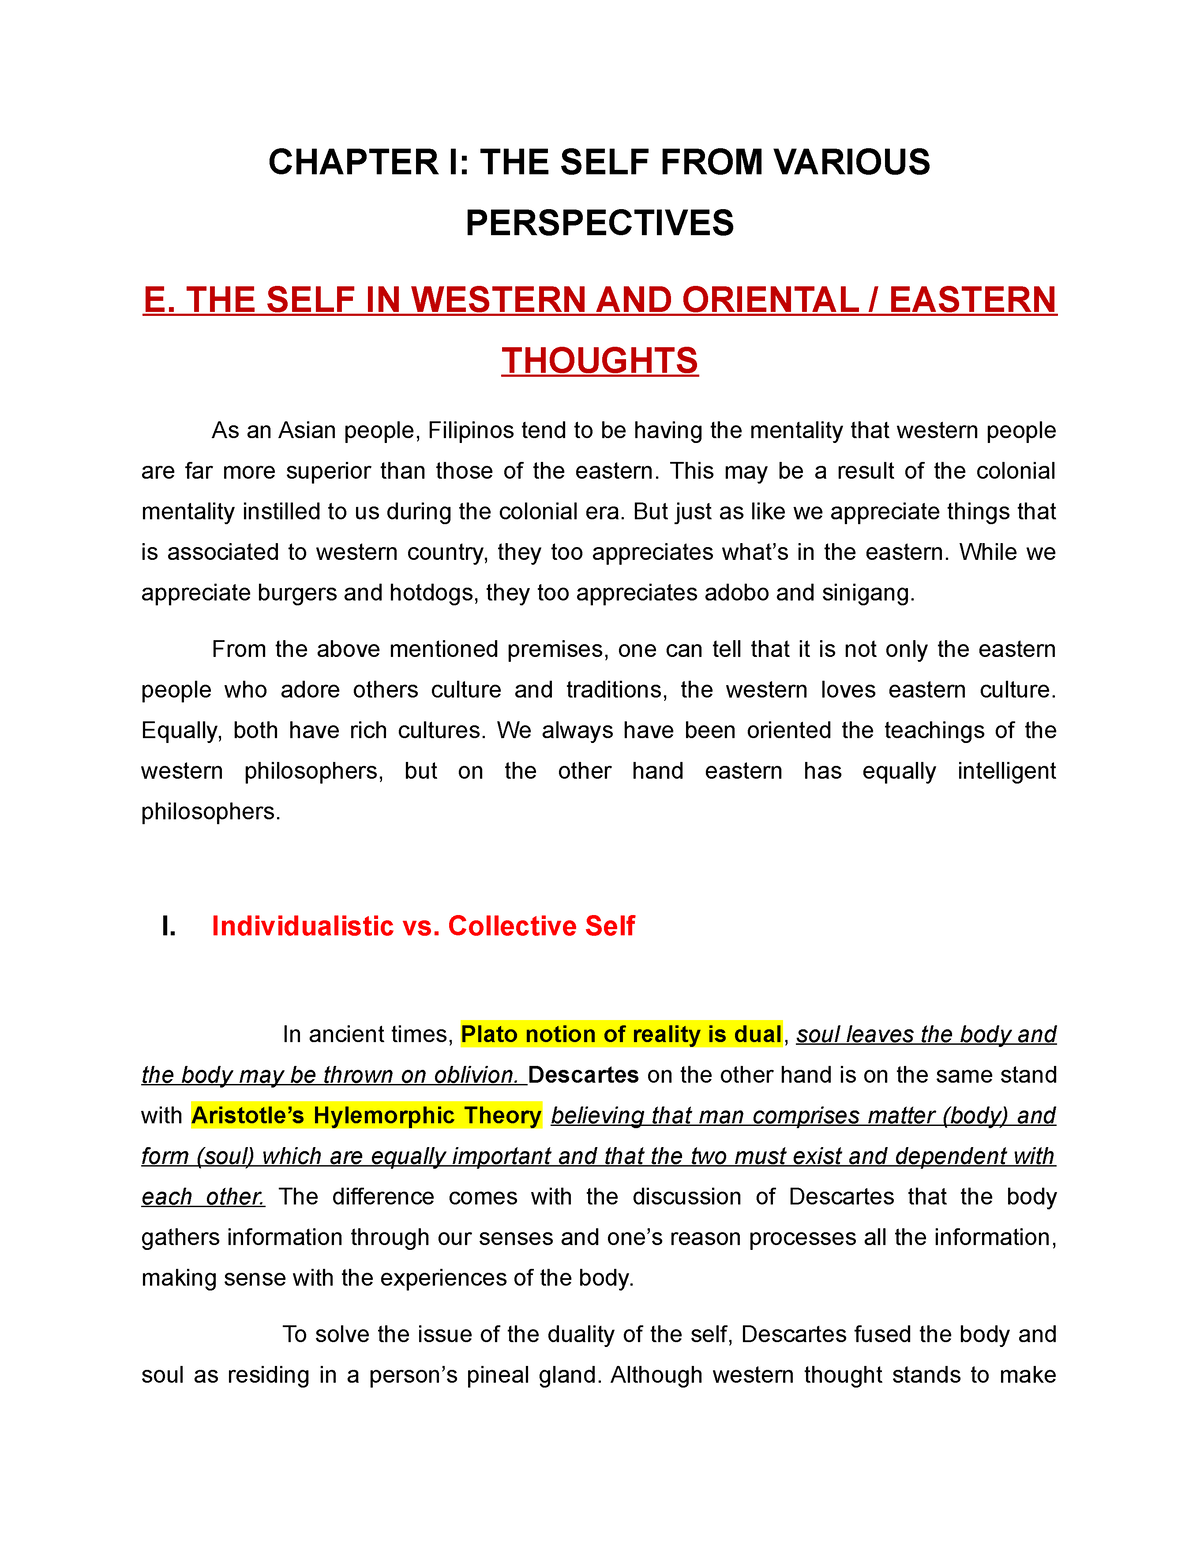 essay about the self in western and eastern thoughts